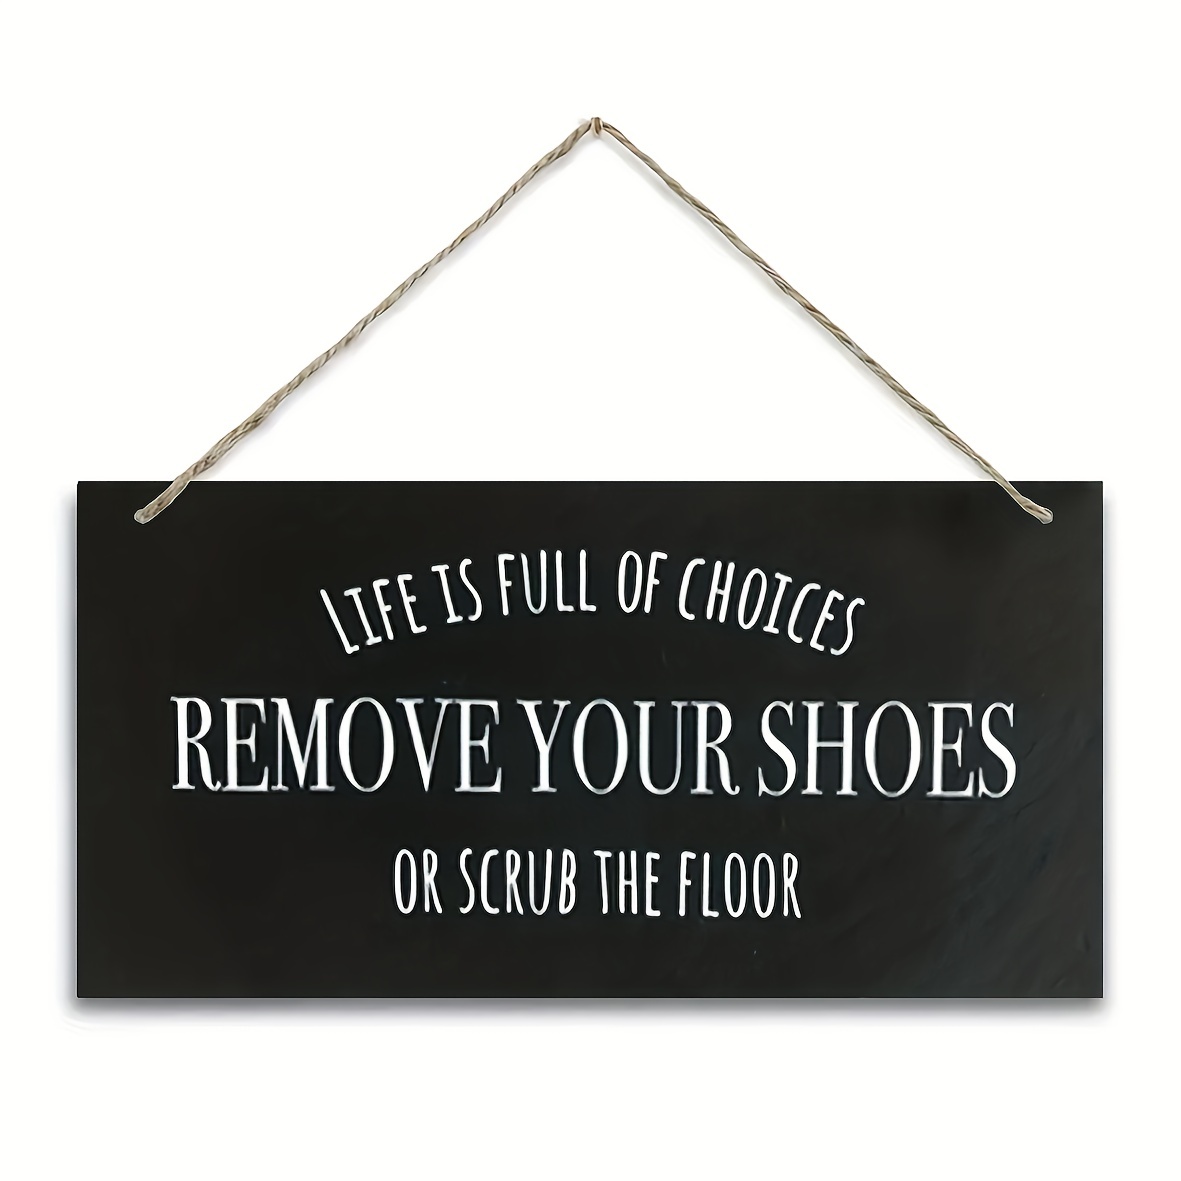 Should you take your shoes off in someone else's home?